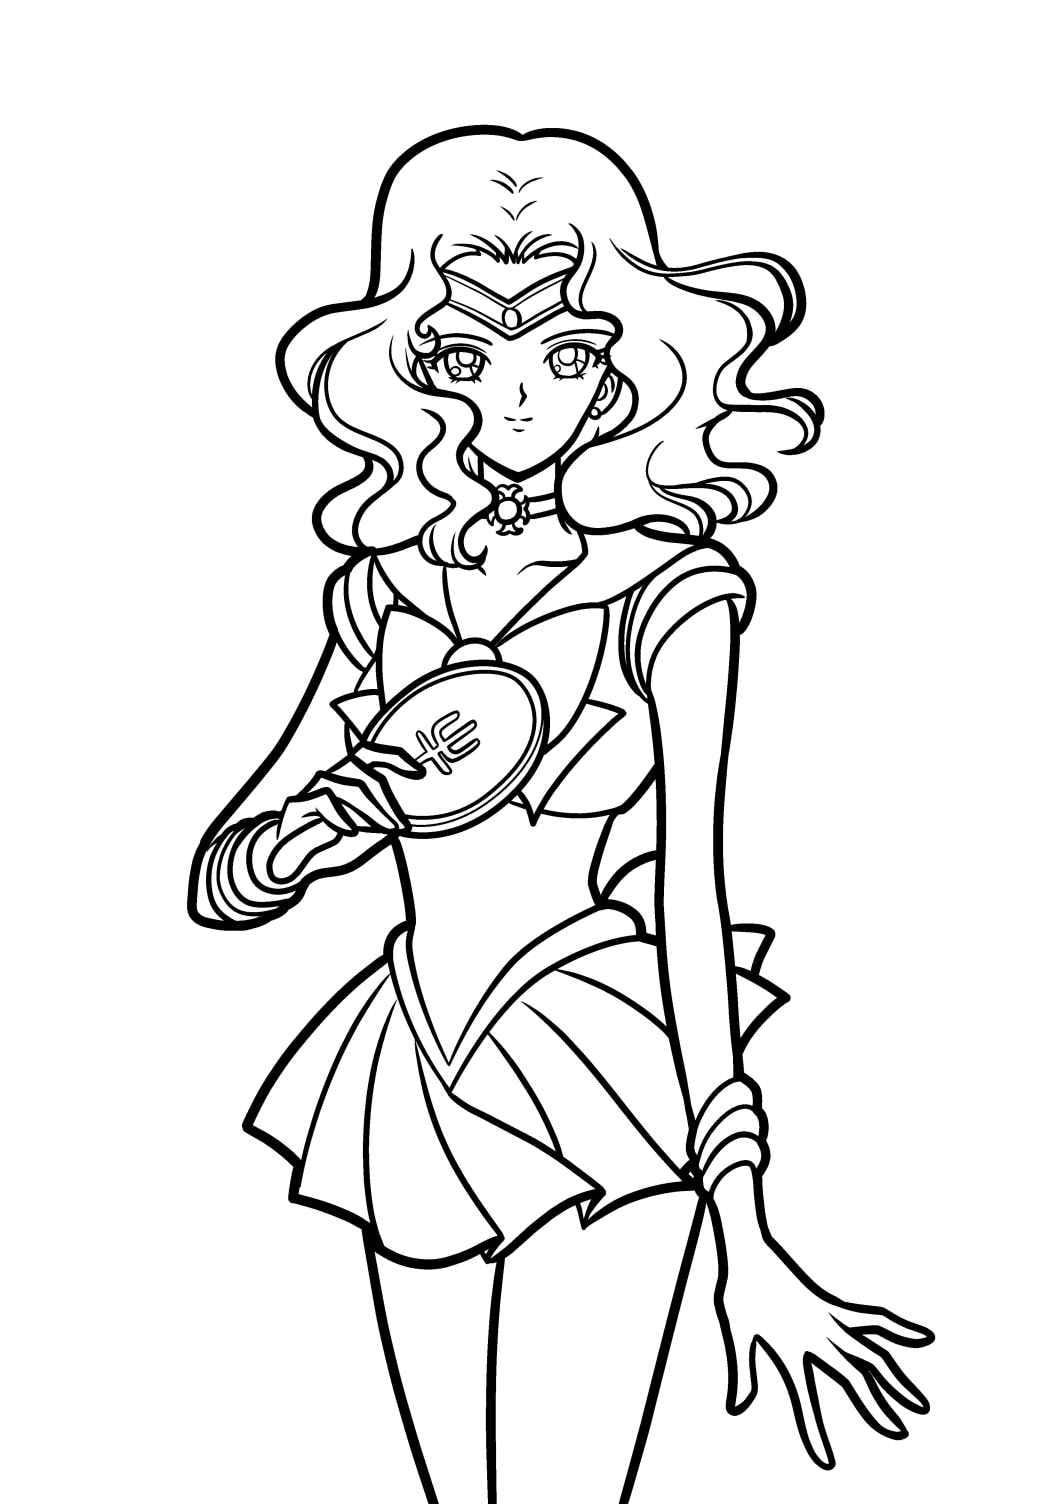 Anime sailor Moon Coloring Pages 40 Page Coloring Book - Etsy